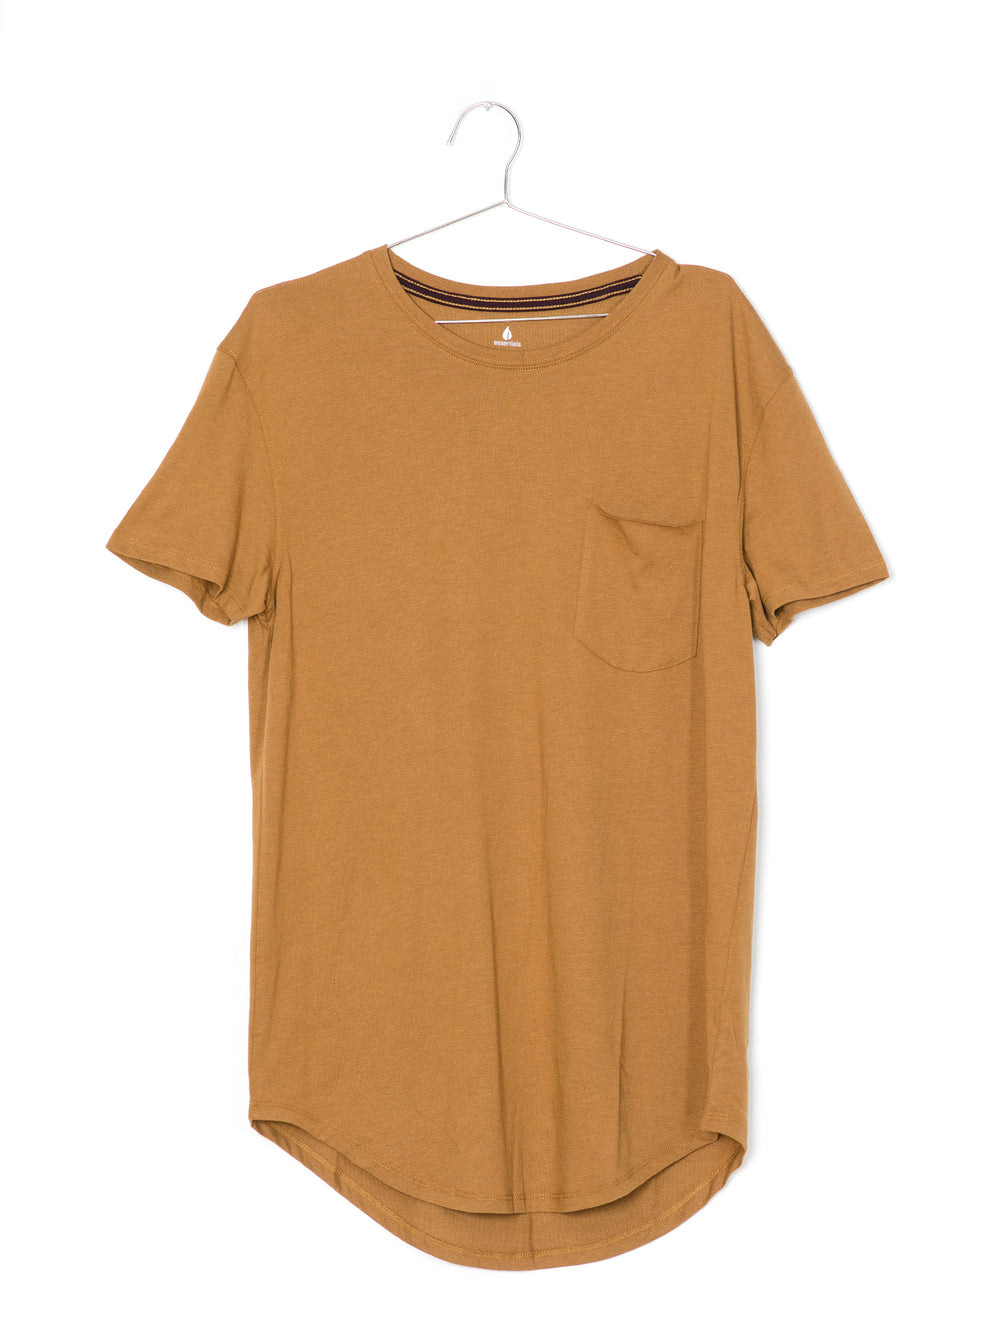 MENS LONGLINE T - TIMBER - CLEARANCE